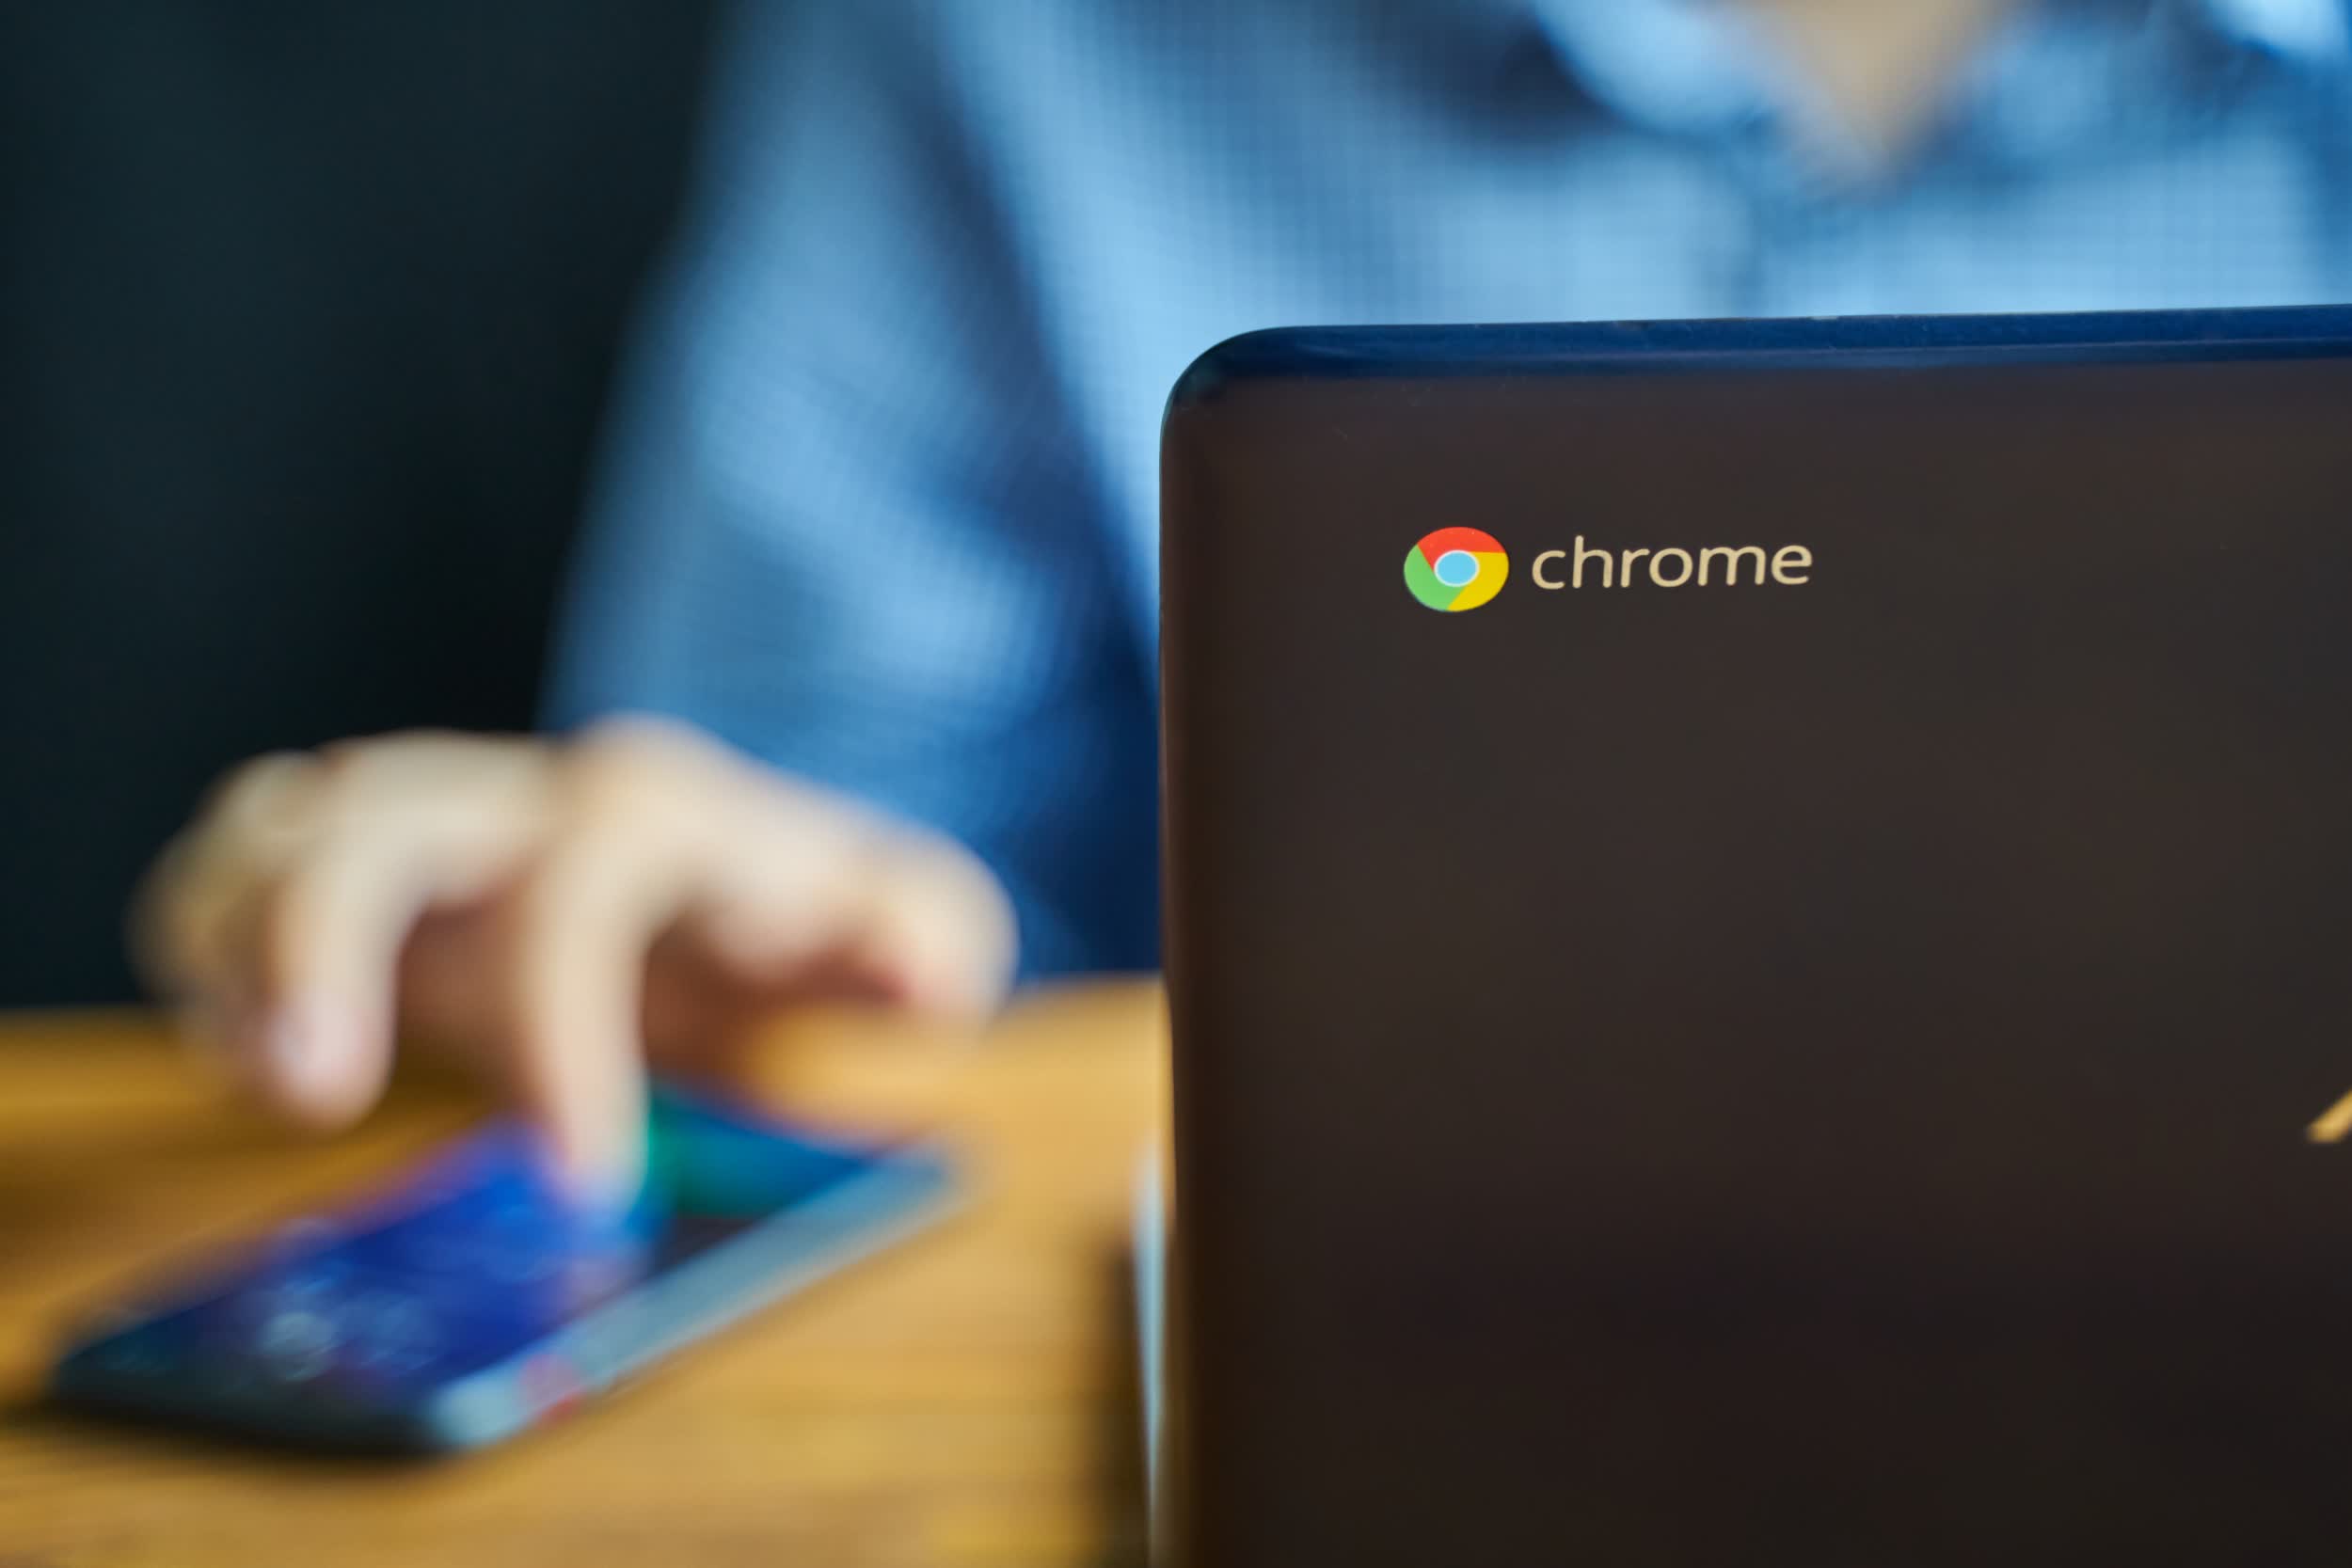 Chromebook demand soared in 2020 due to the pandemic